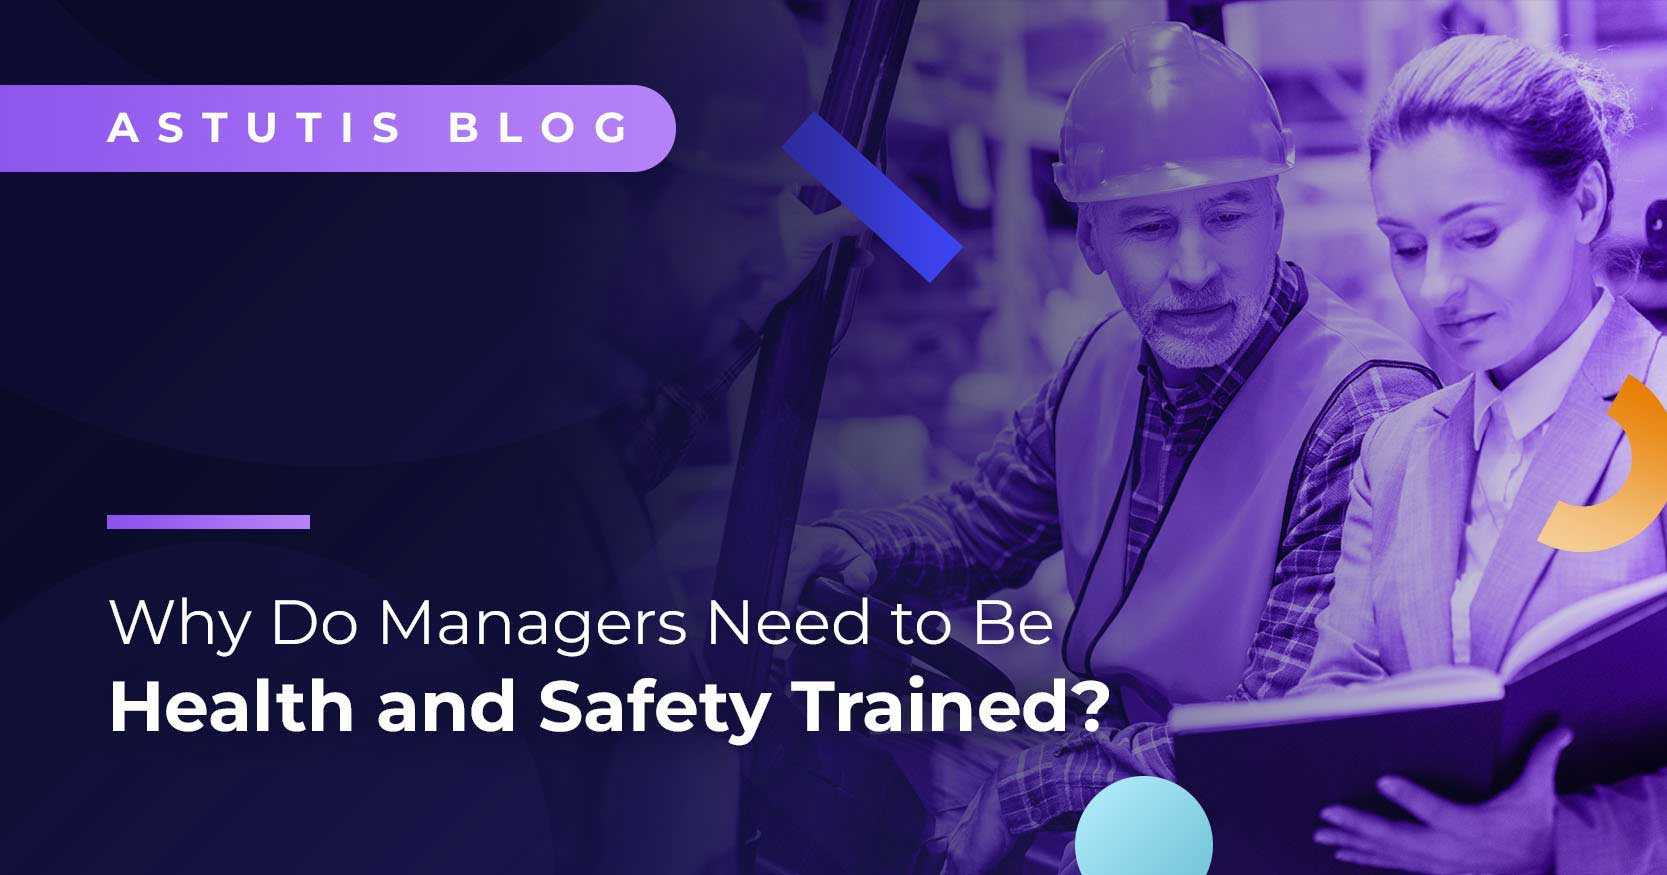 Why Do Managers Need to Be Health and Safety Trained? Image